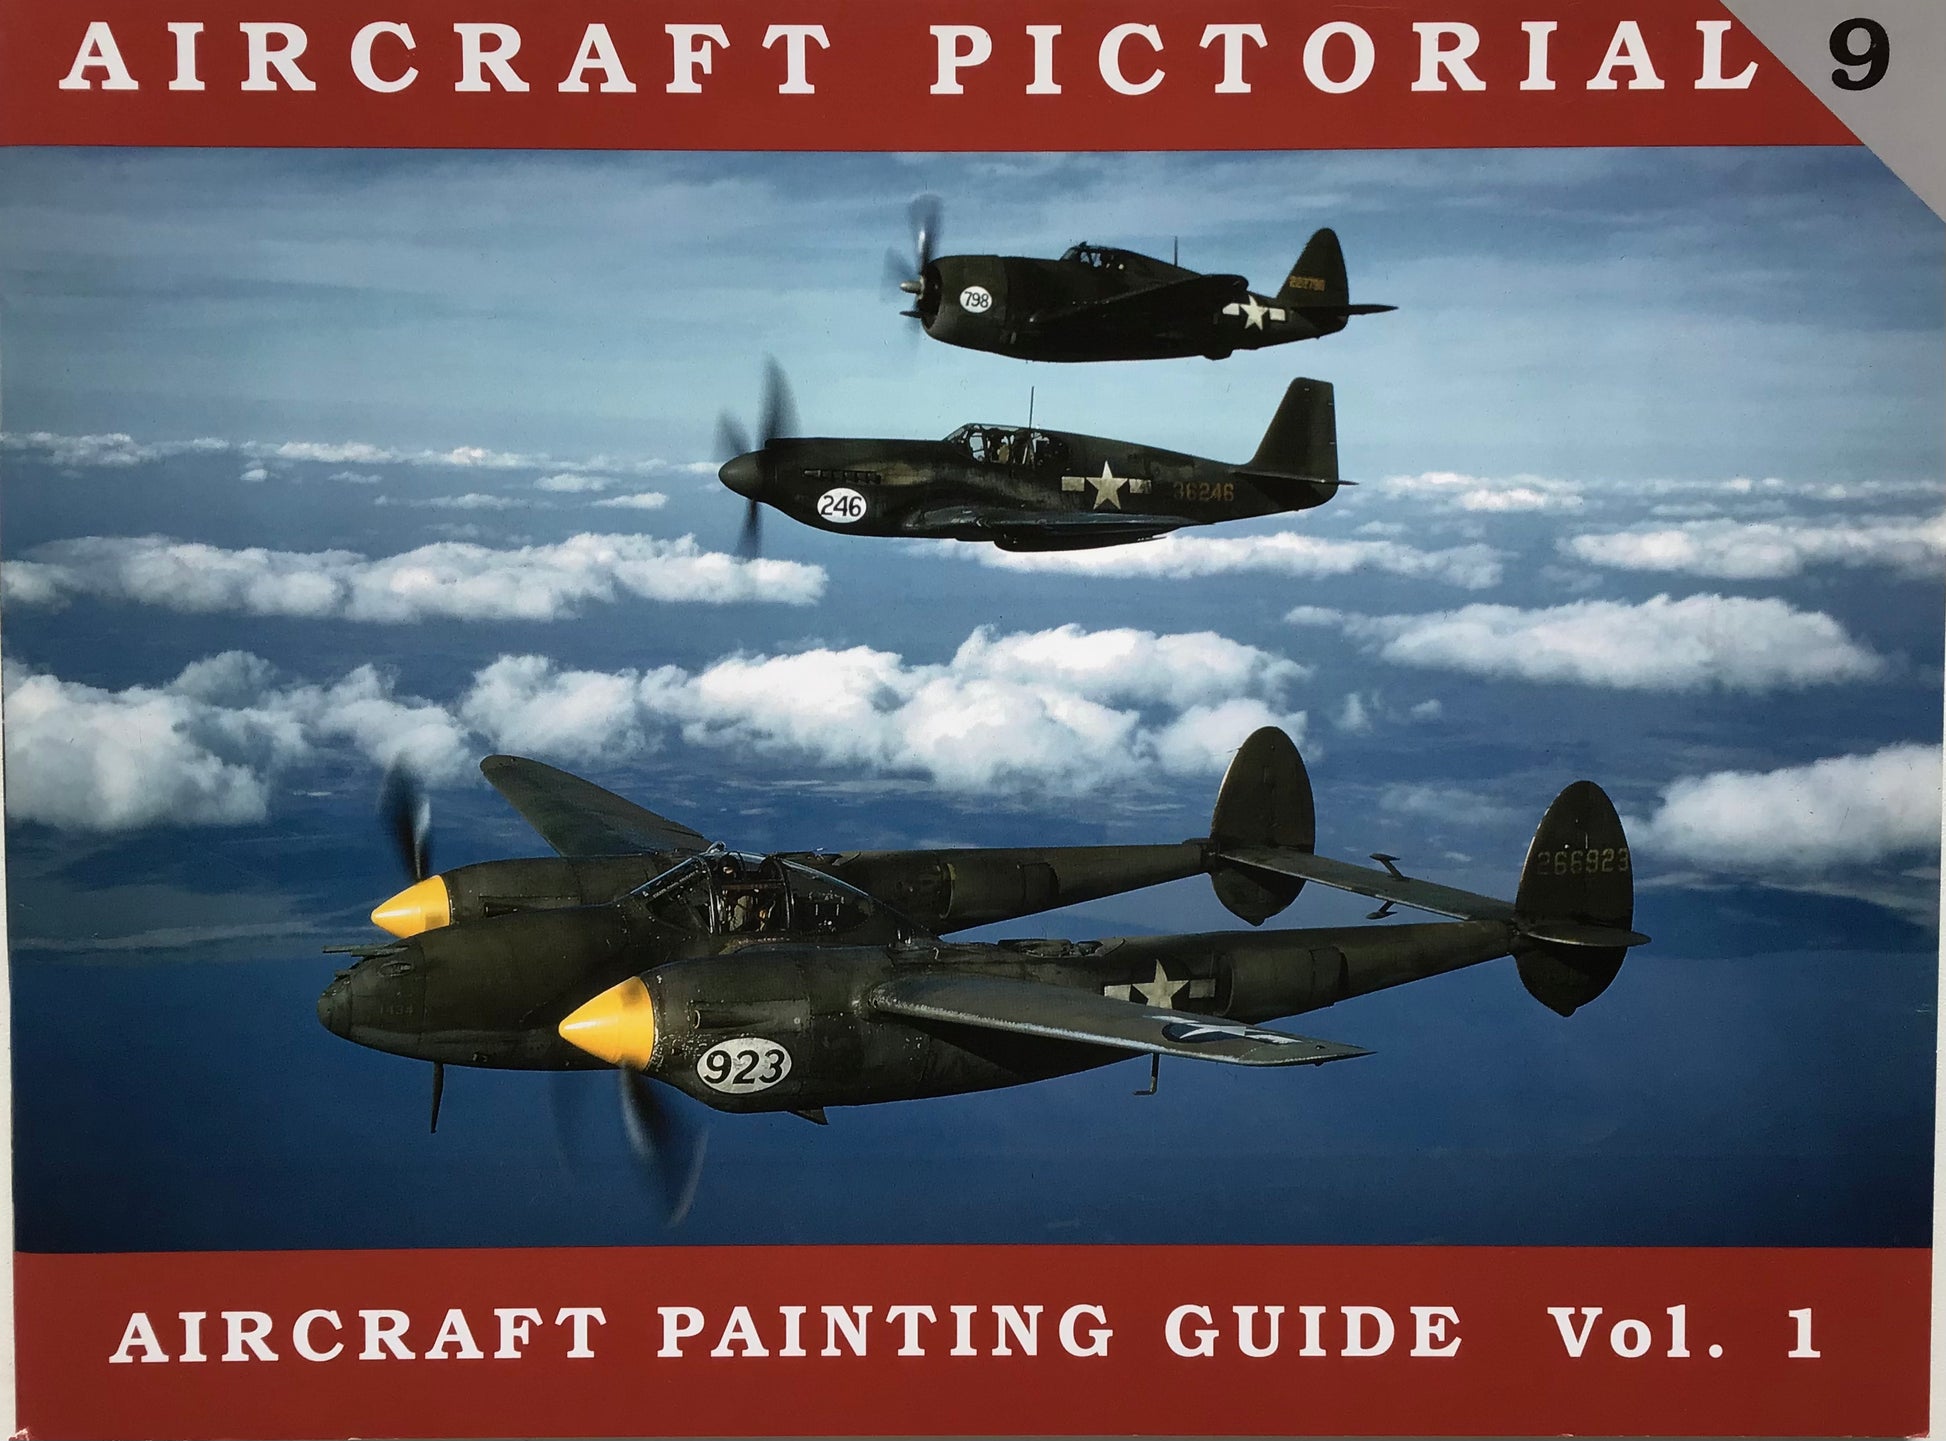 Aircraft Pictorial 9: Aircraft Painting Guide Vol.1 - Chester Model Centre